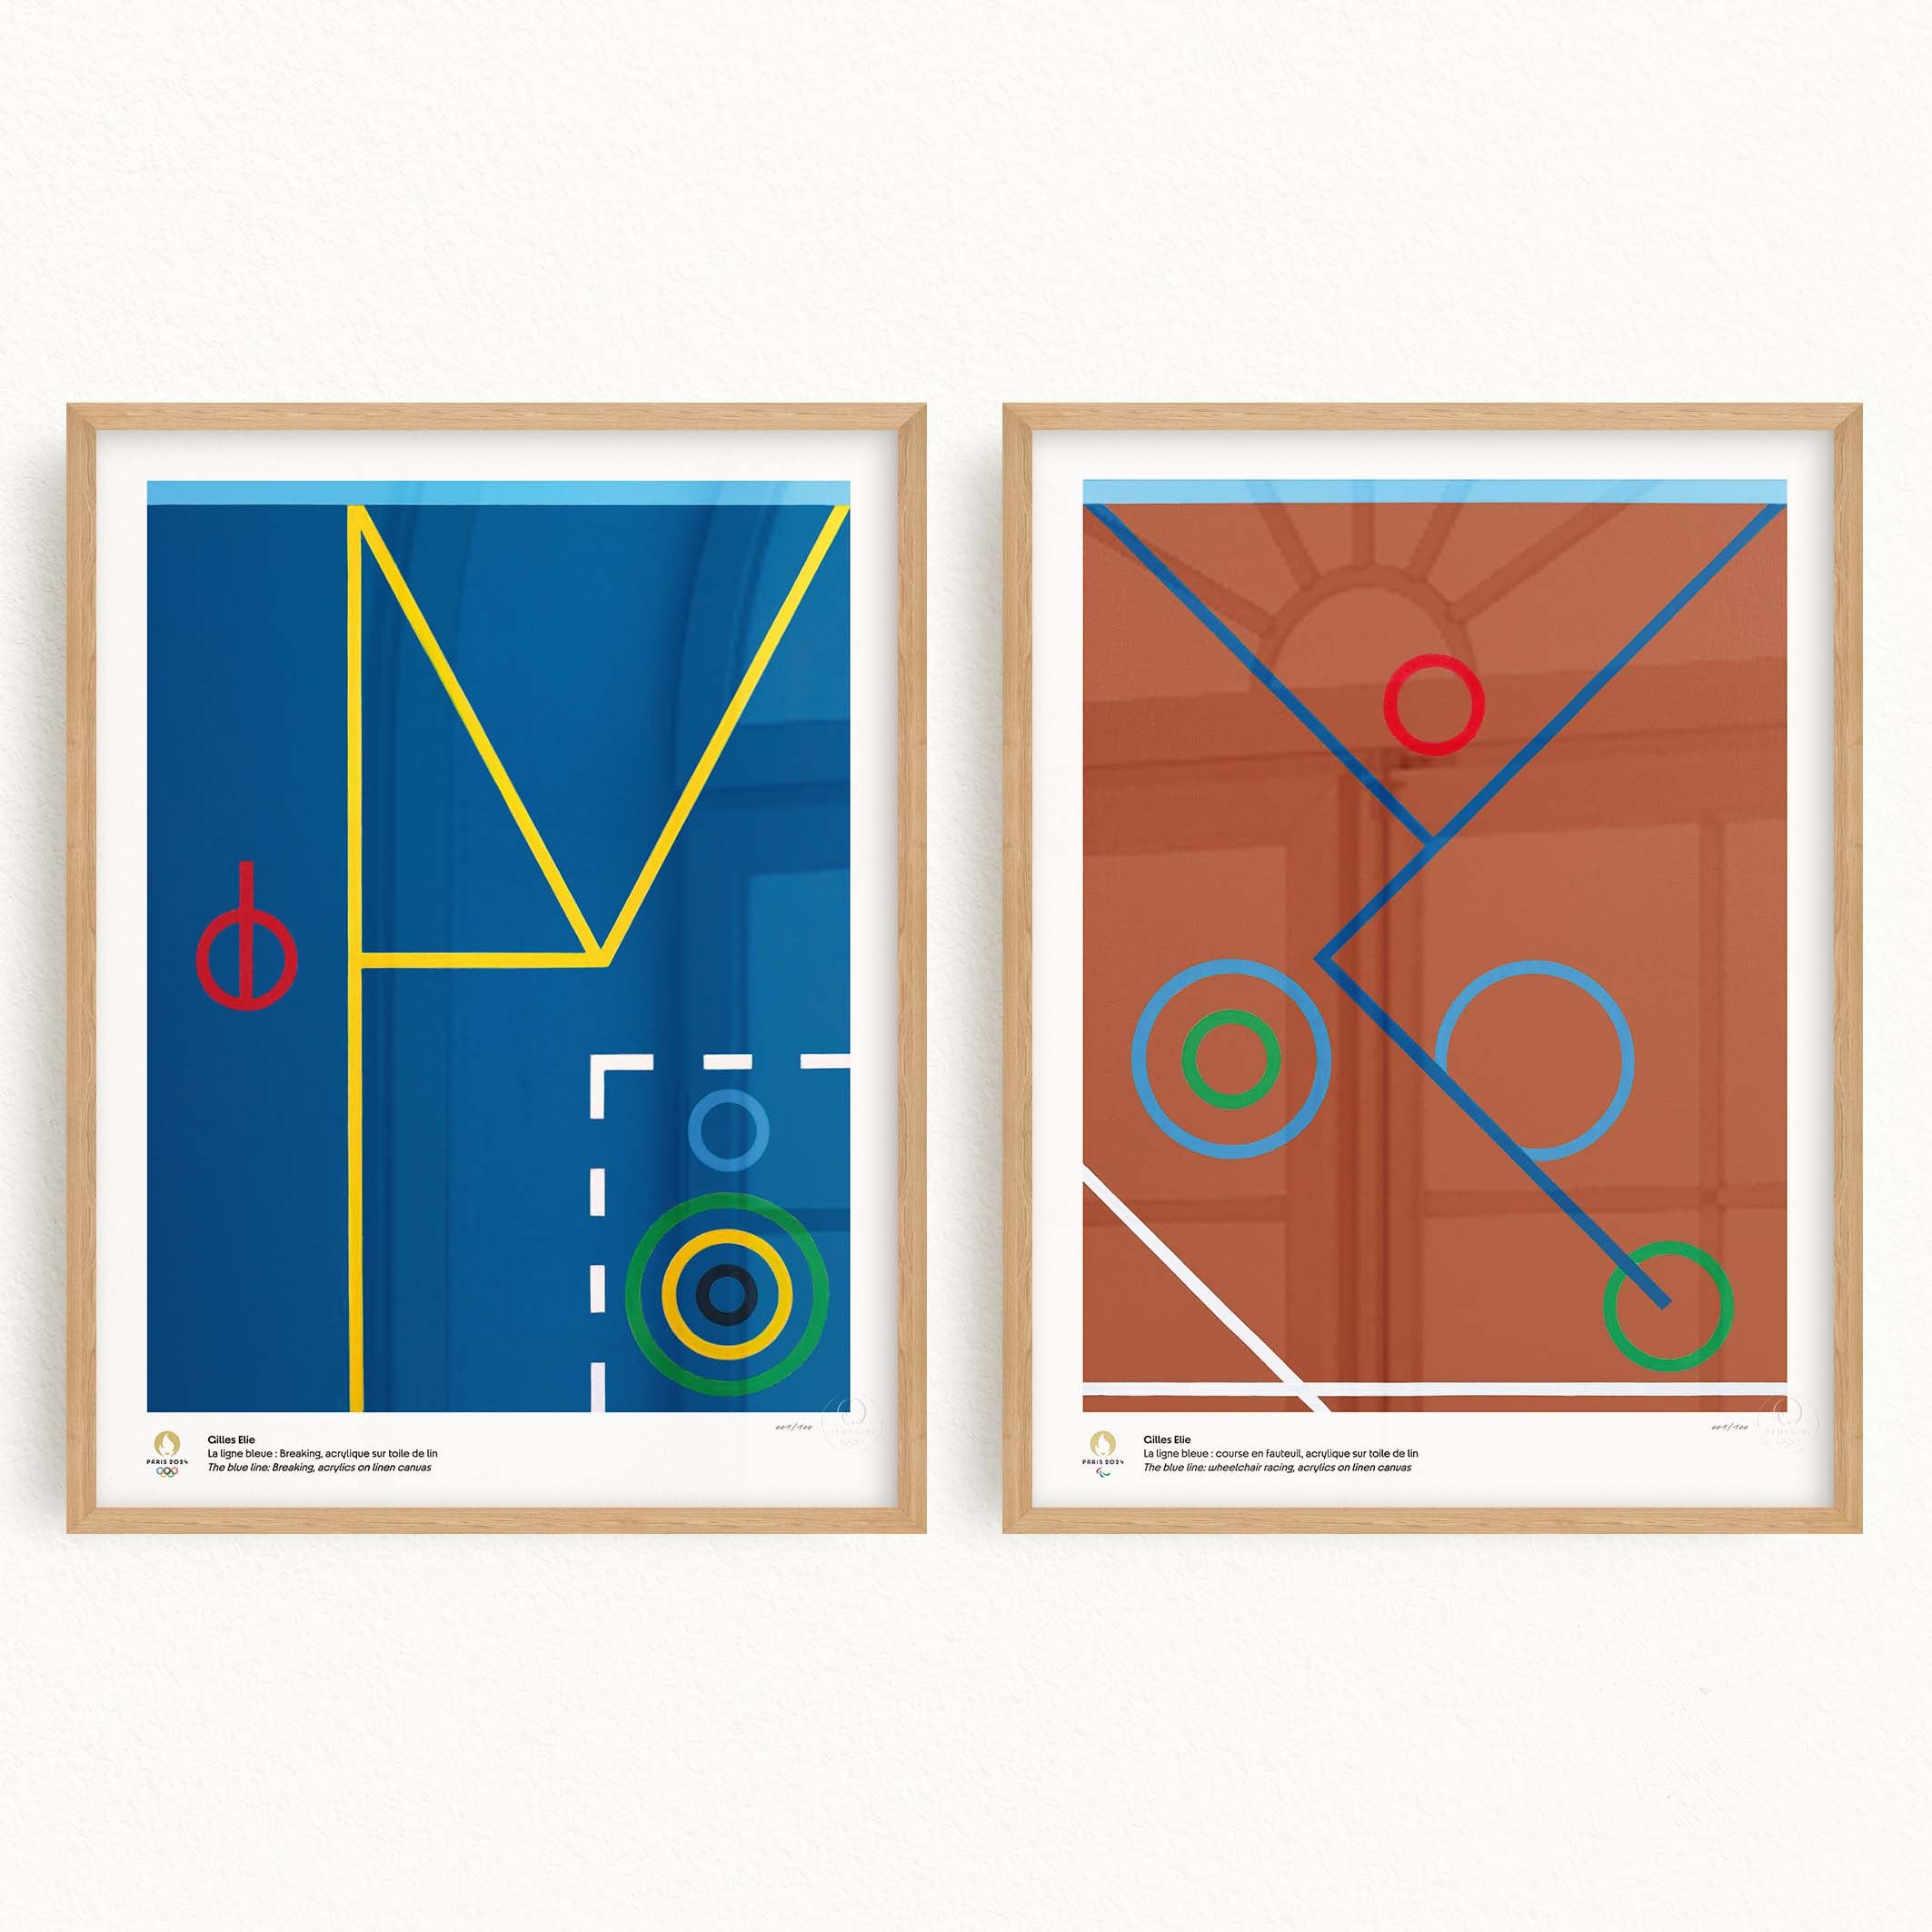 Diptych of artistic posters Paris 2024 for the Olympic and Paralympic games by Gilles Elie